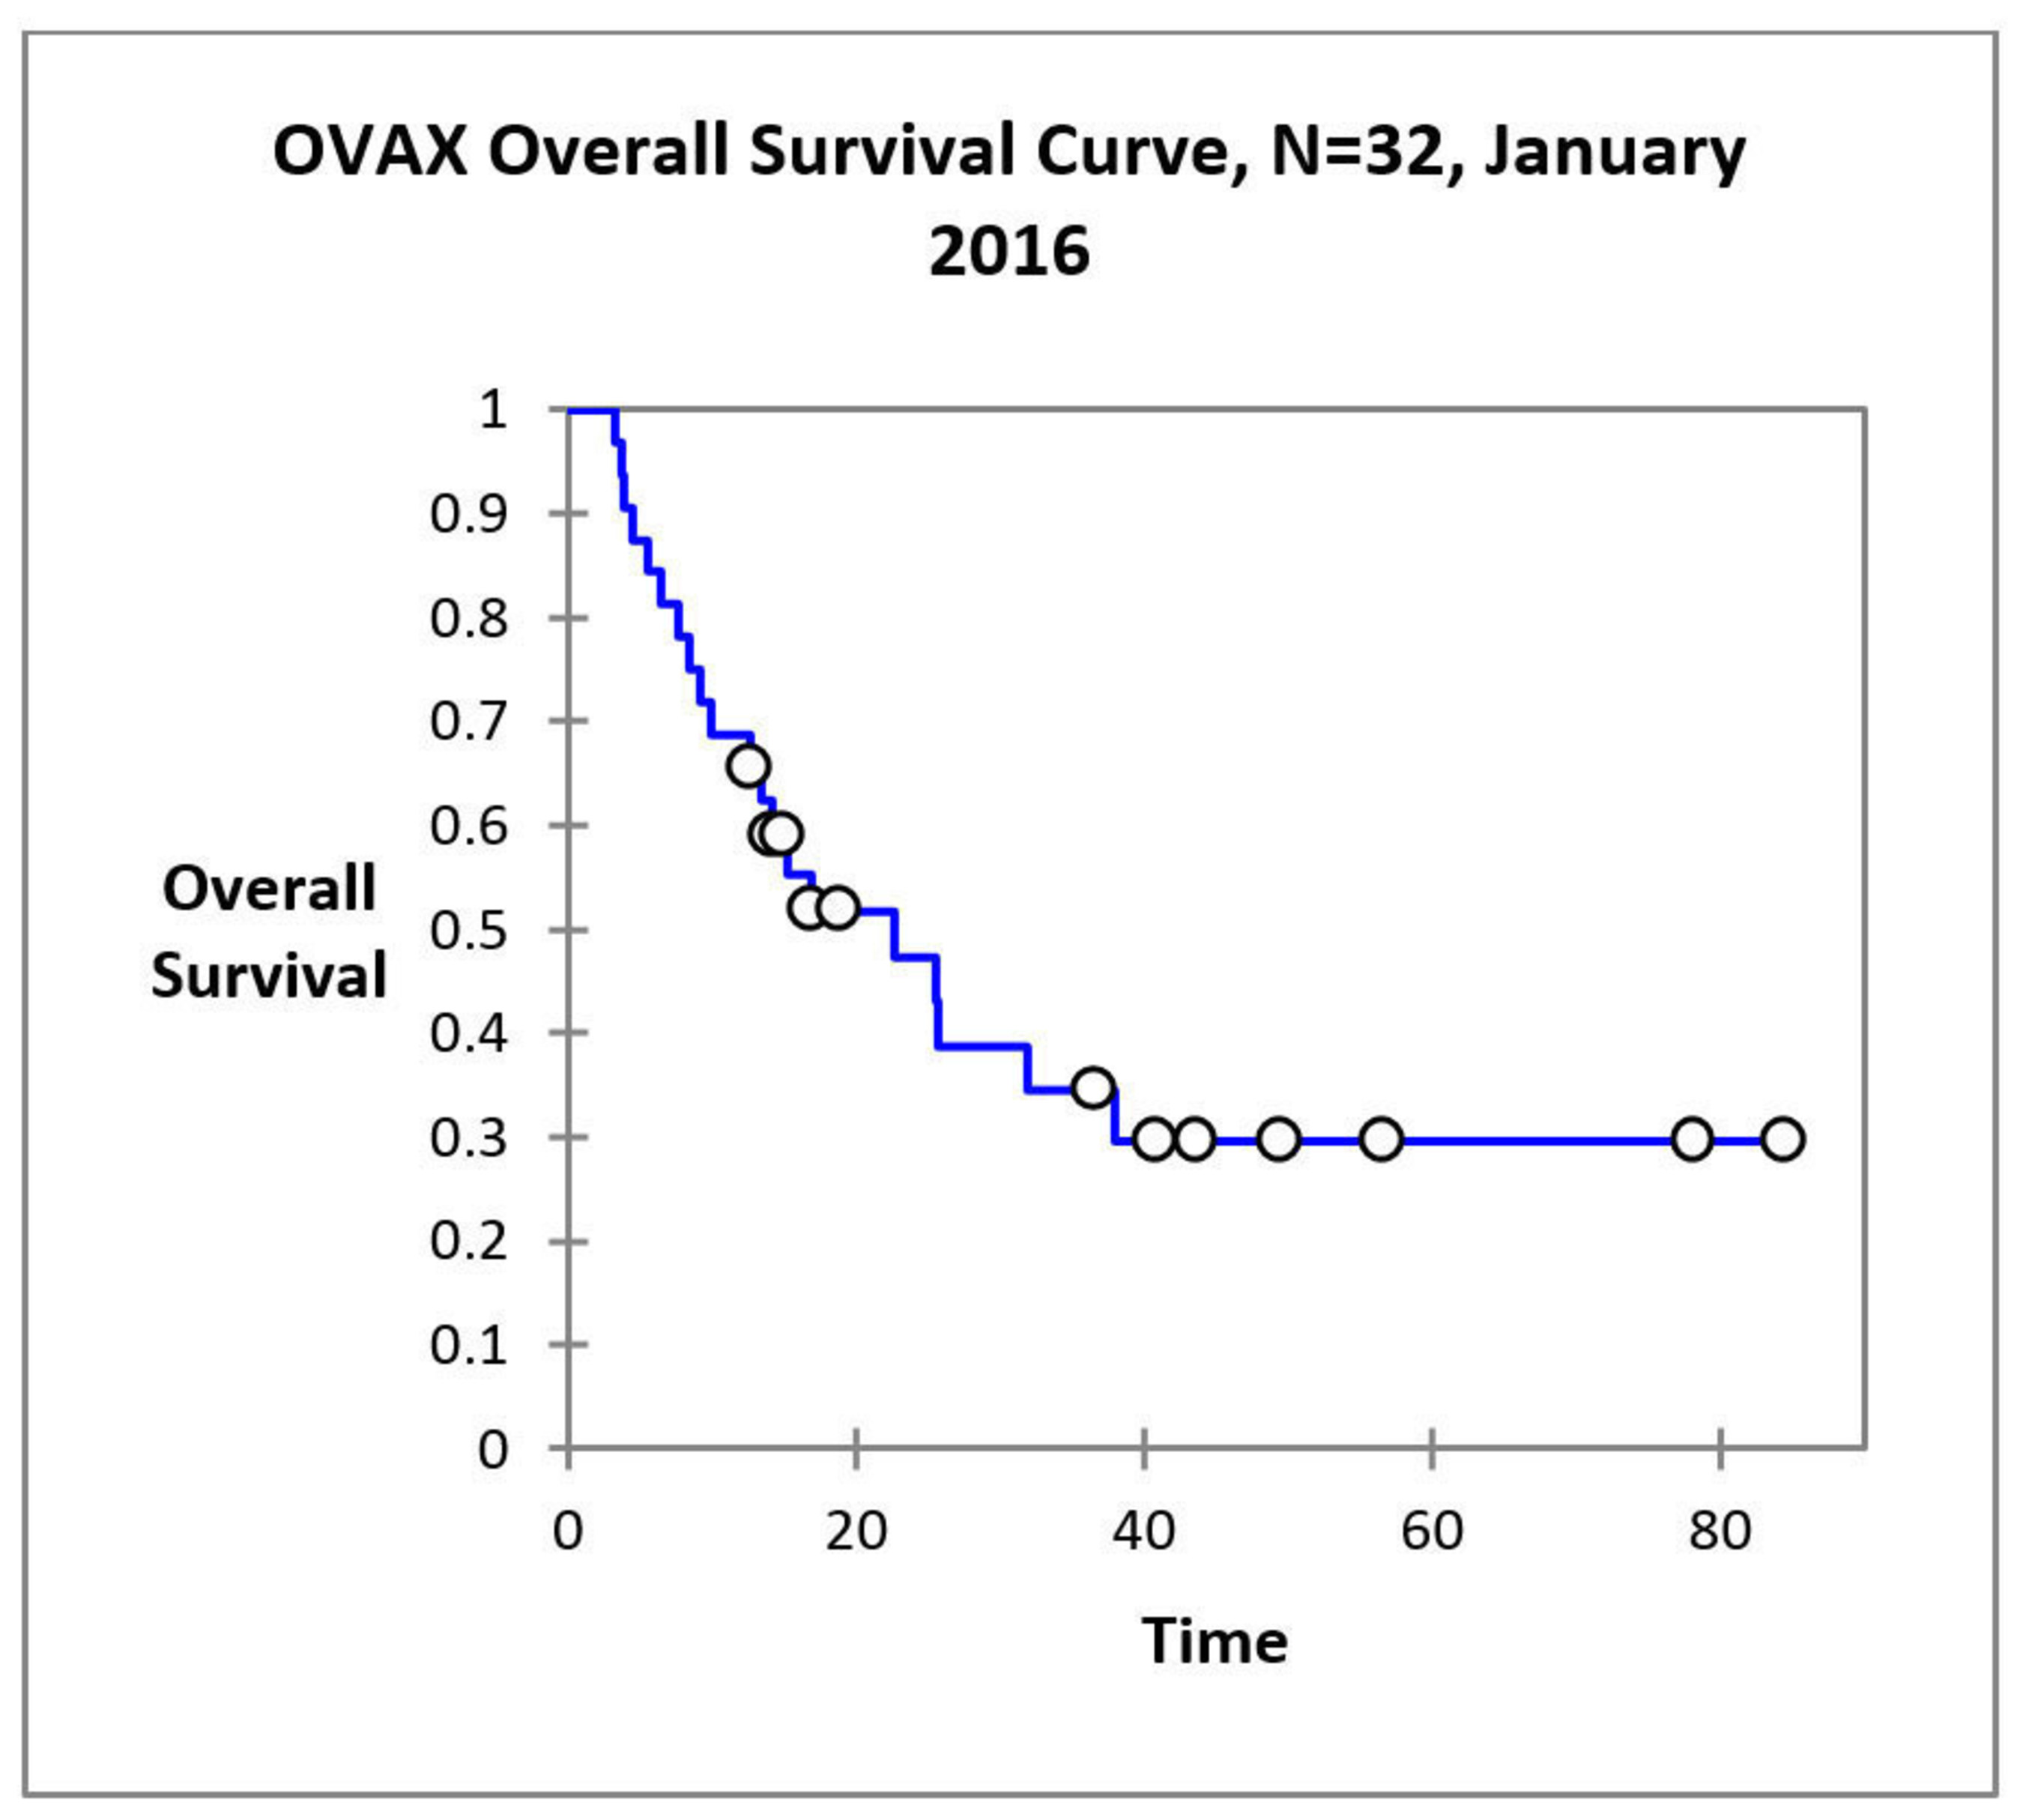 OVAX Phase 1/2 Clinical Trial Results.